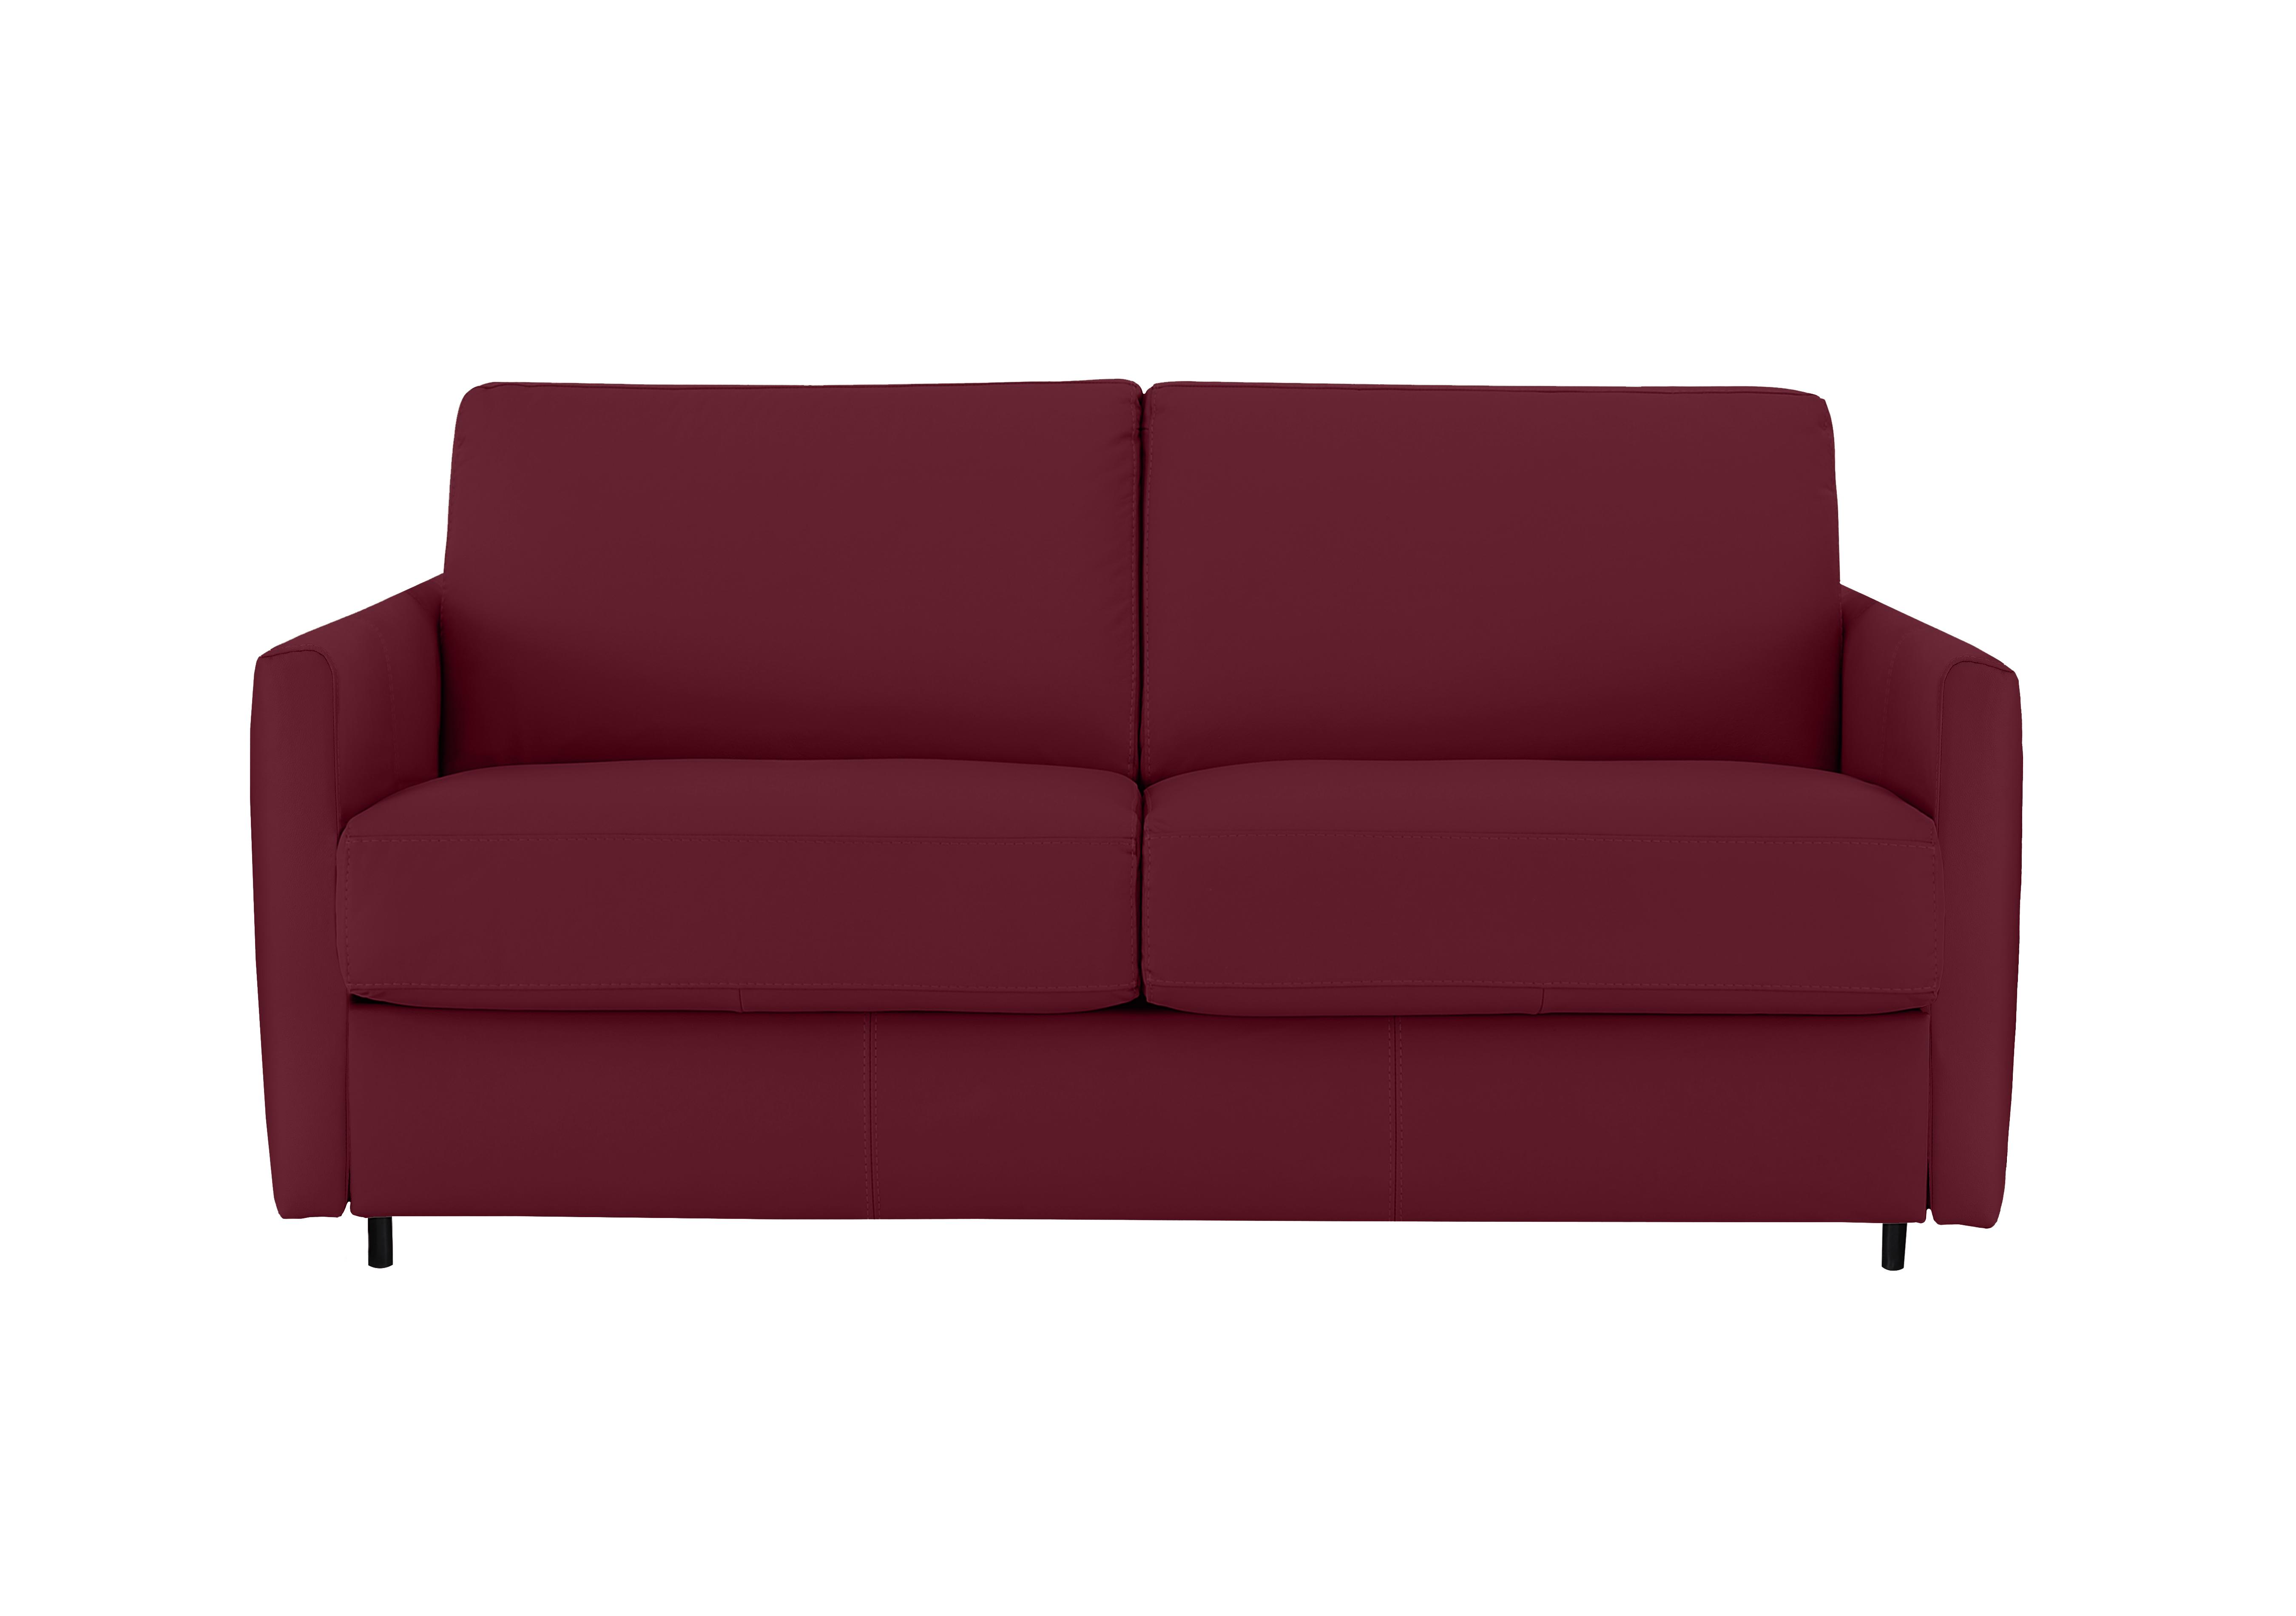 Alcova 2.5 Seater Leather Sofa Bed with Slim Arms in Dali Bordeaux 1521 on Furniture Village